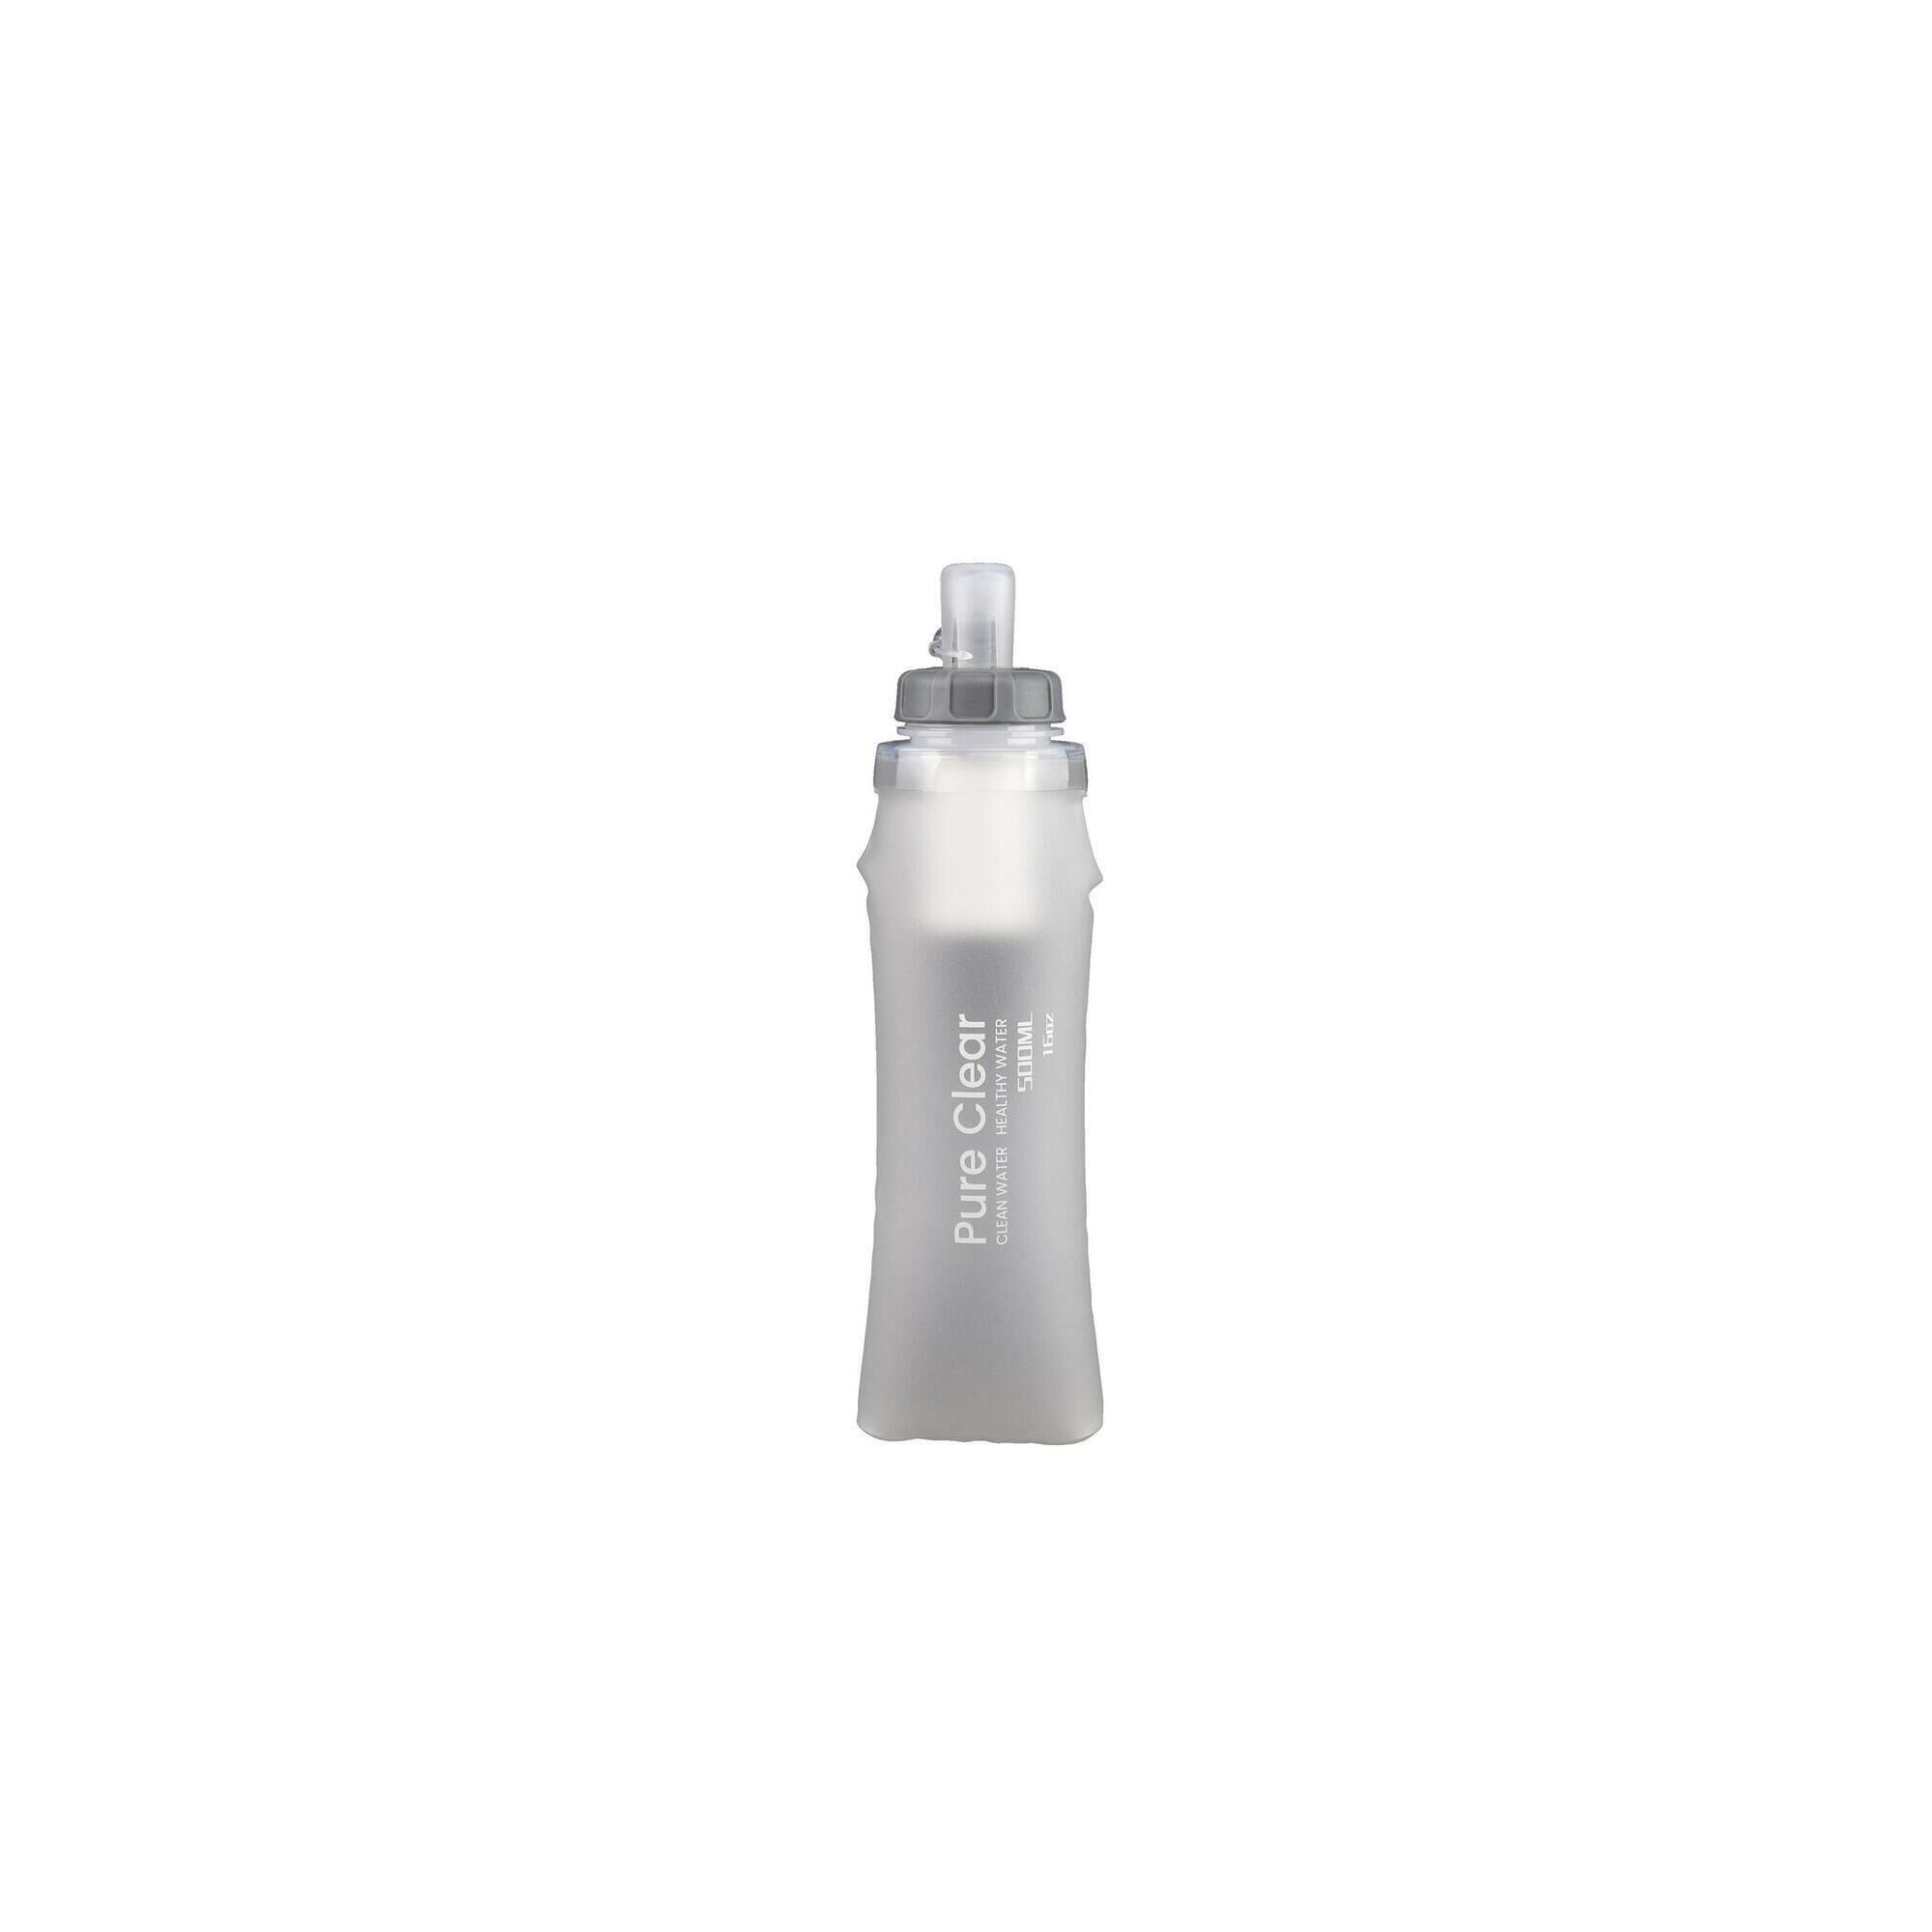 PURE CLEAR 500ml Collapsible Squeeze Water Filter Bottle - Advanced Water Filtration